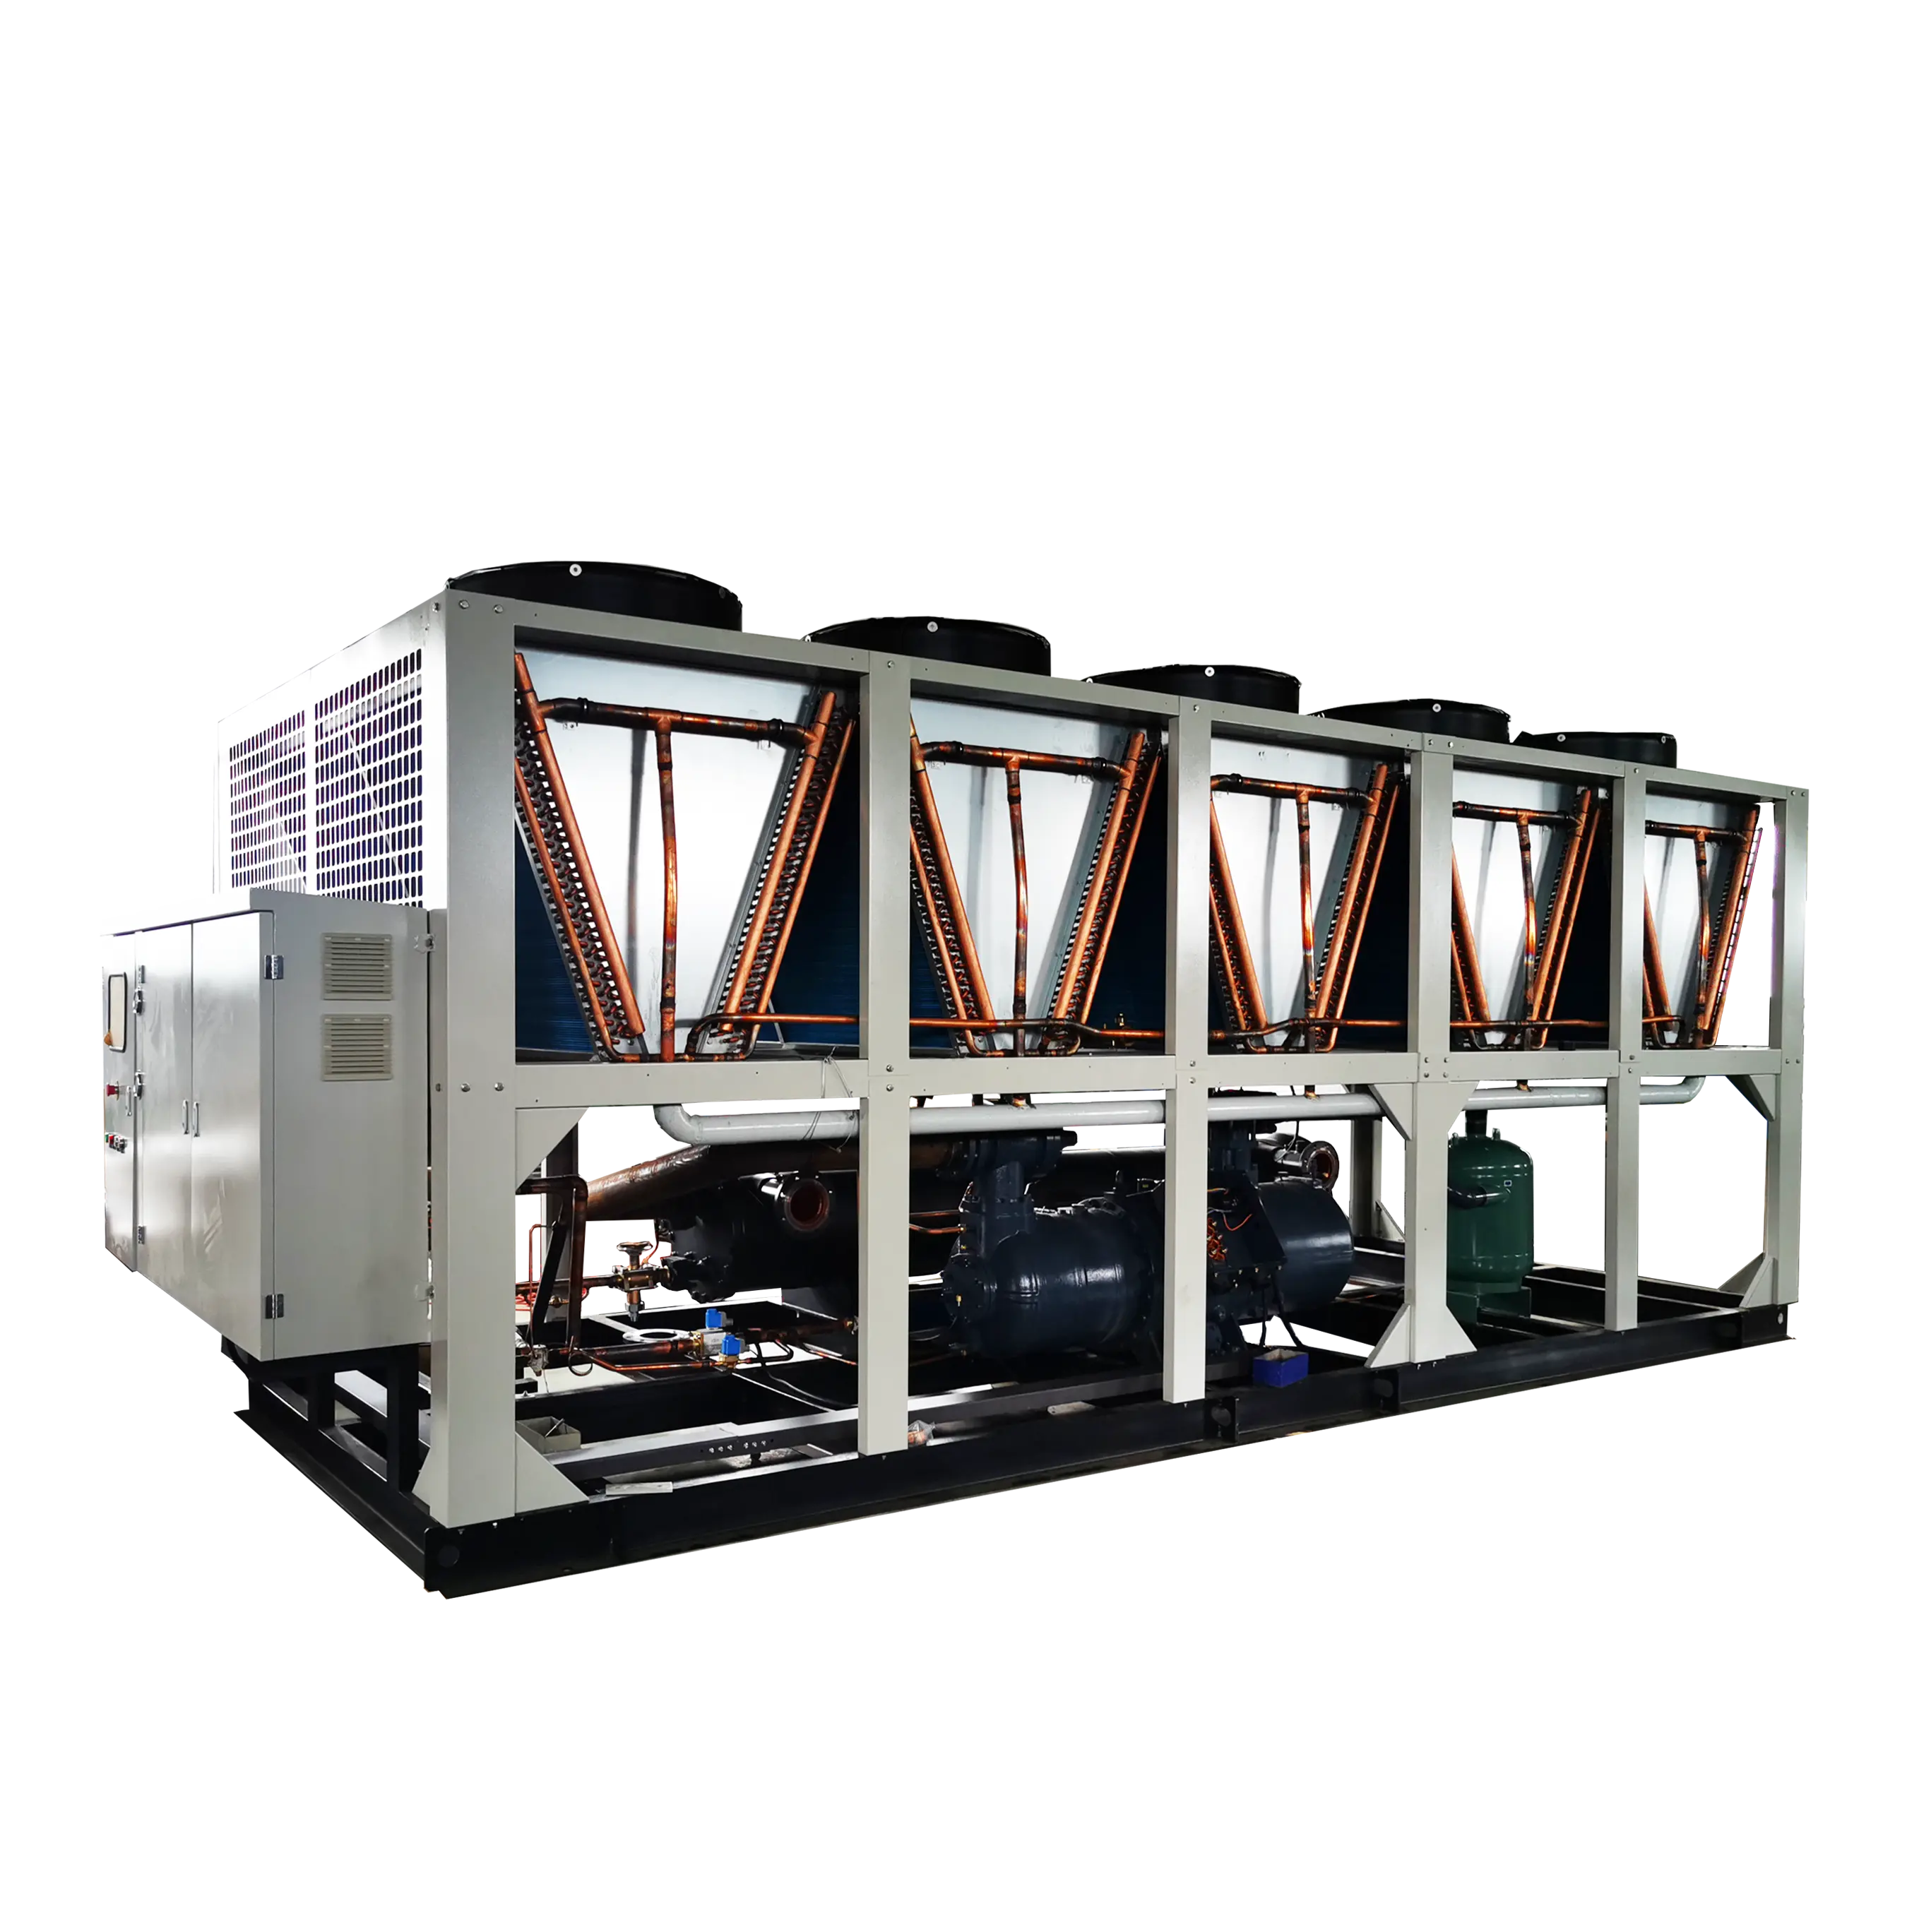 30HP-200HP Plastic Extrusion Chiller injection machine chiller Industrial Chilling System Water Chiller